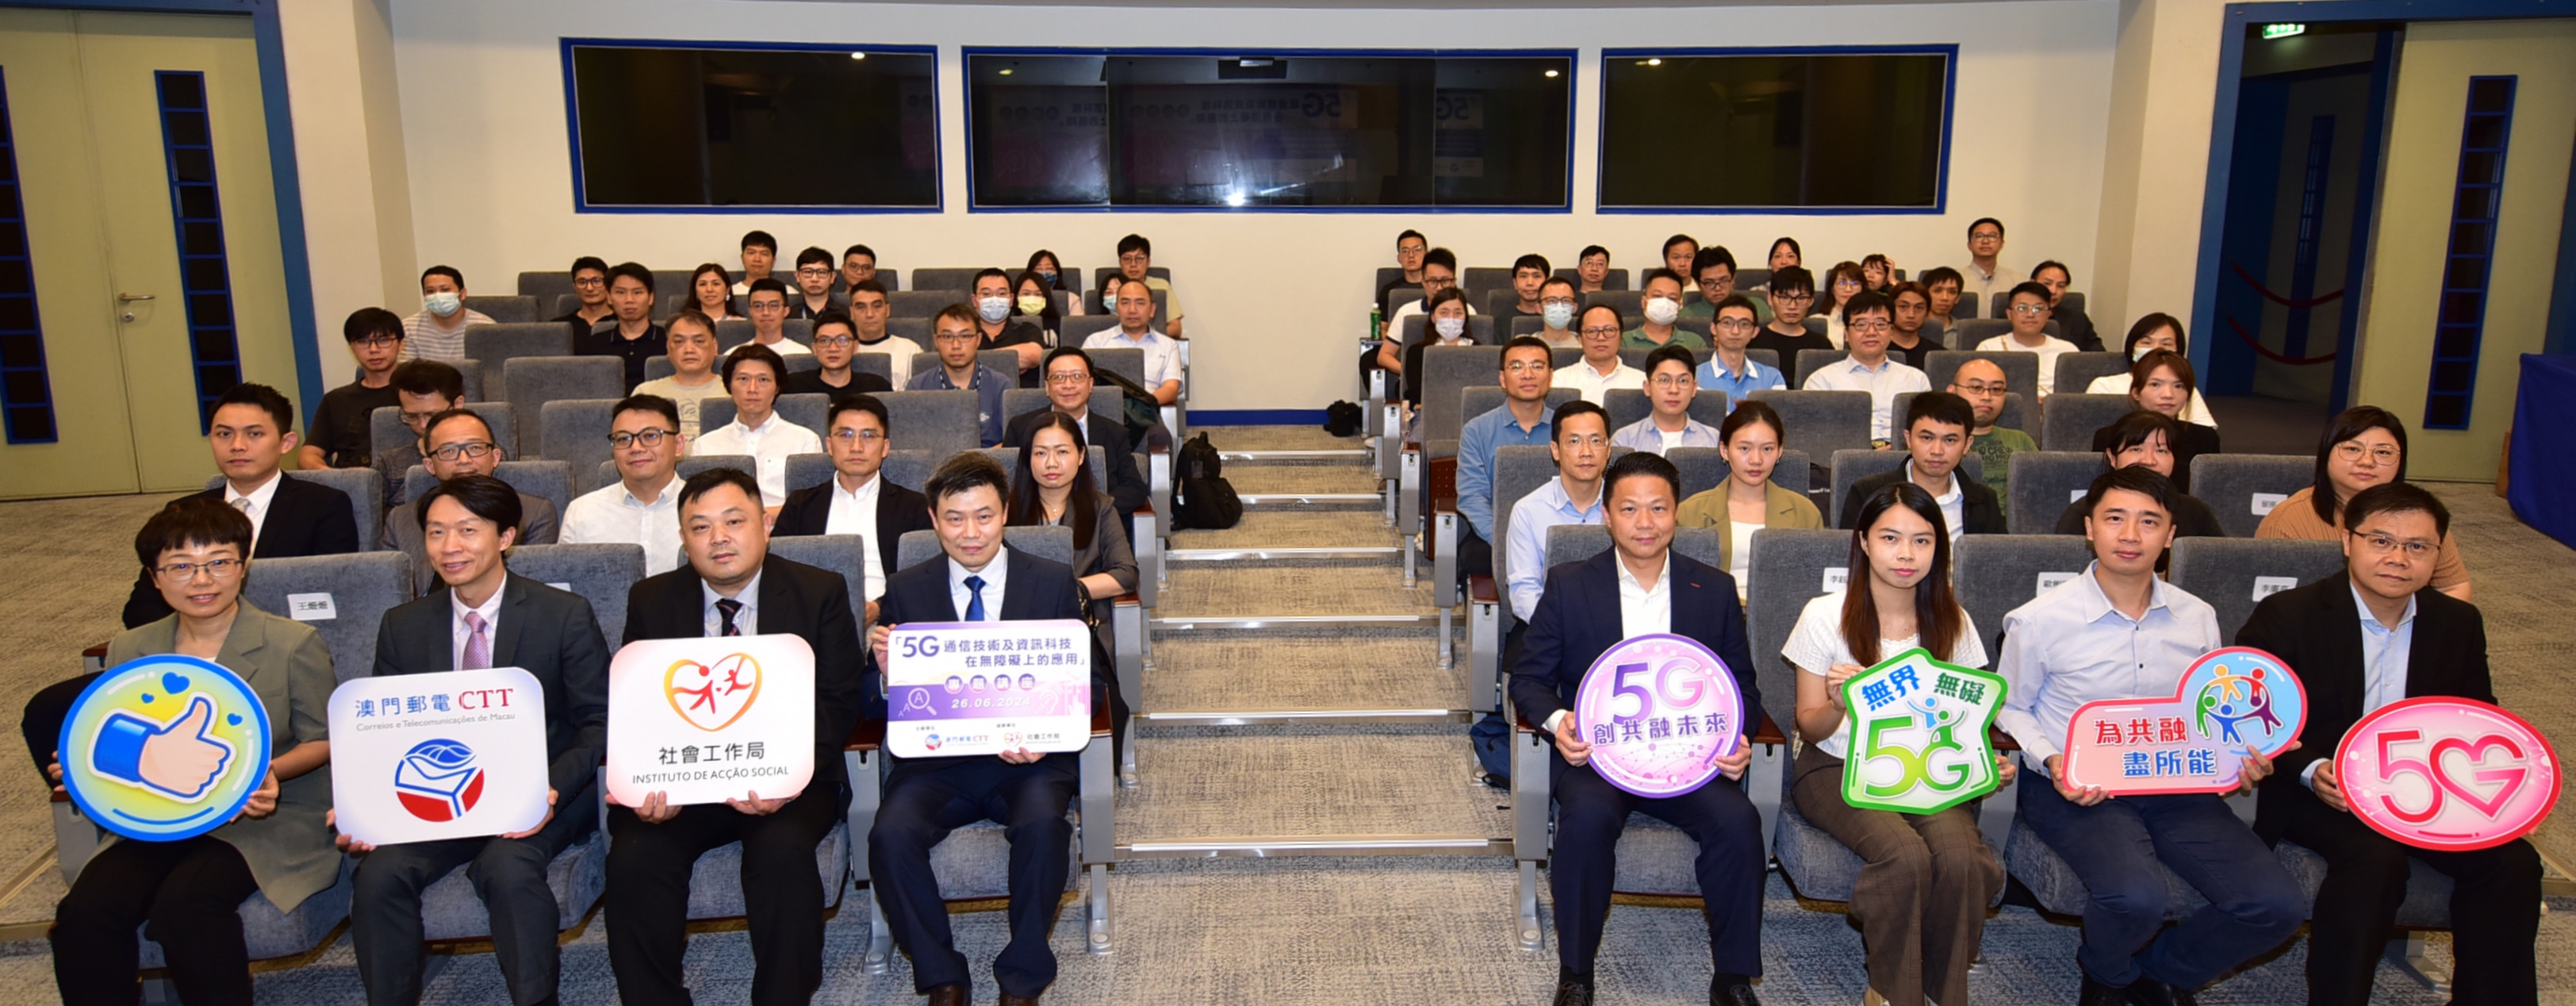 “Application of 5G Communication and Information Technology on Accessibility” Seminar was successfully held